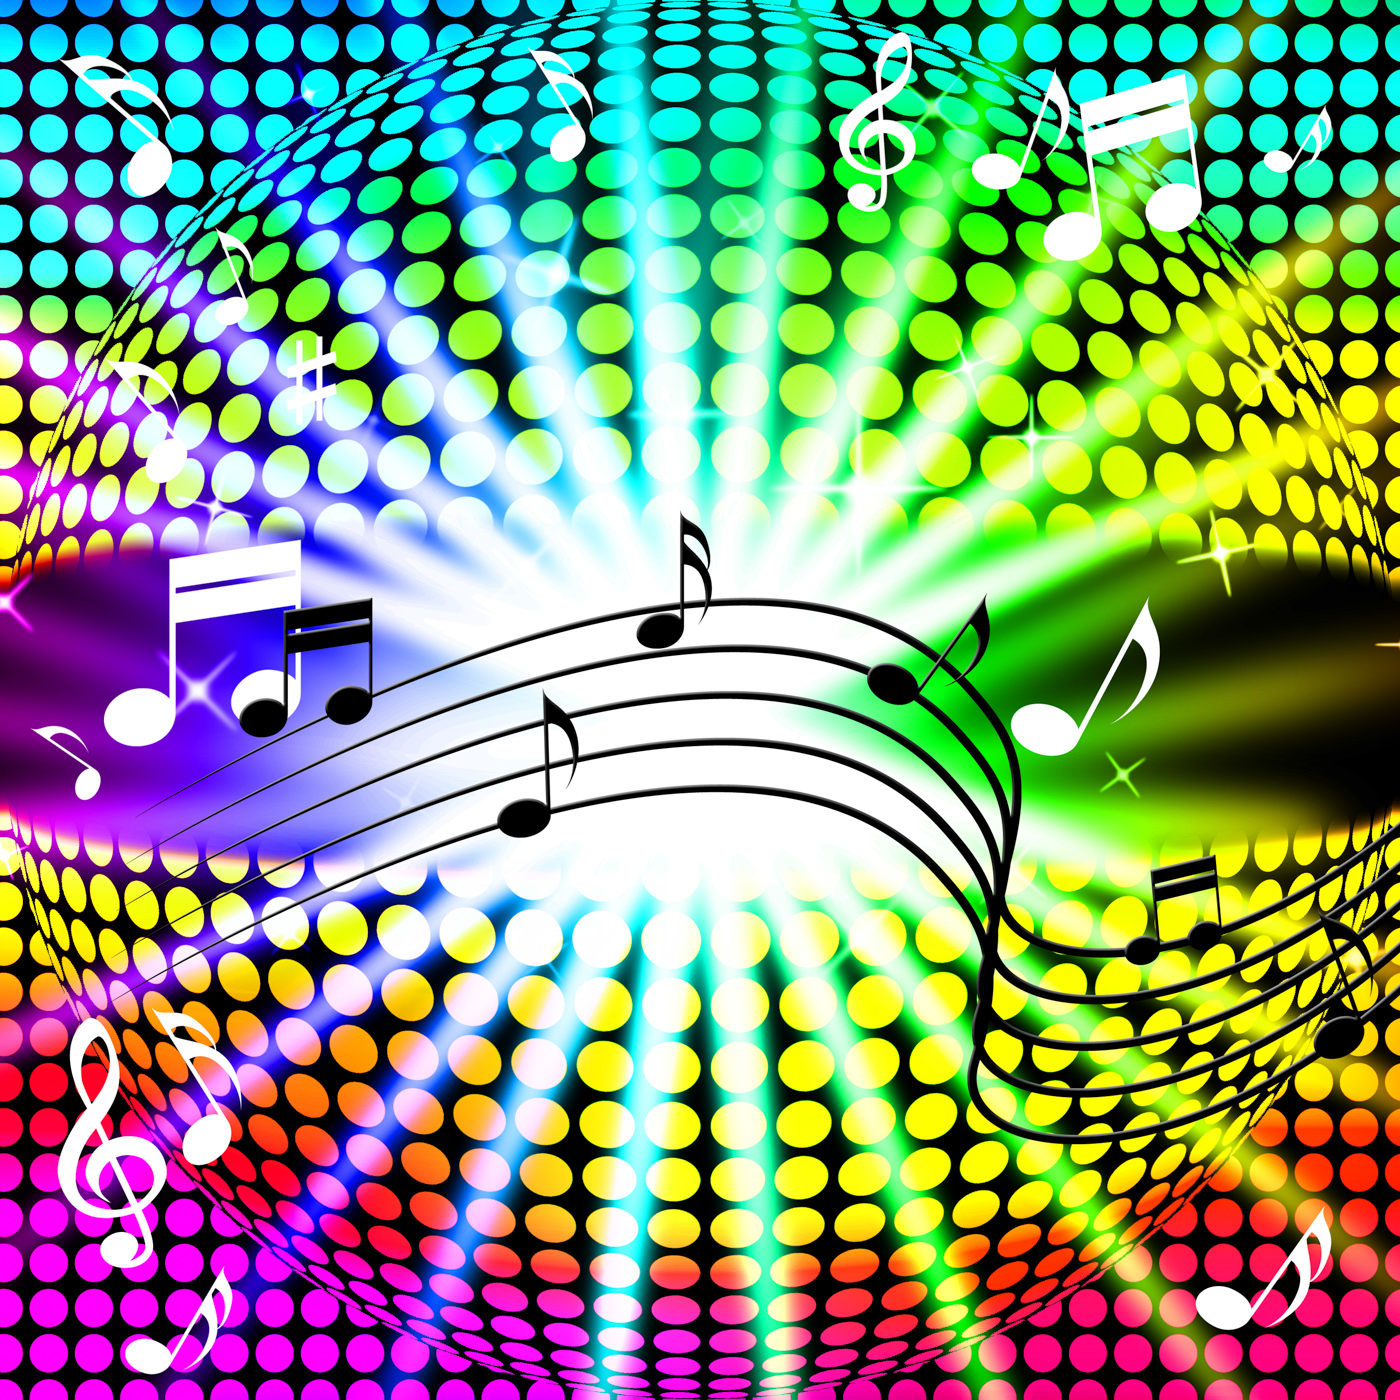 Music disco ball background shows songs dancing and beams photo